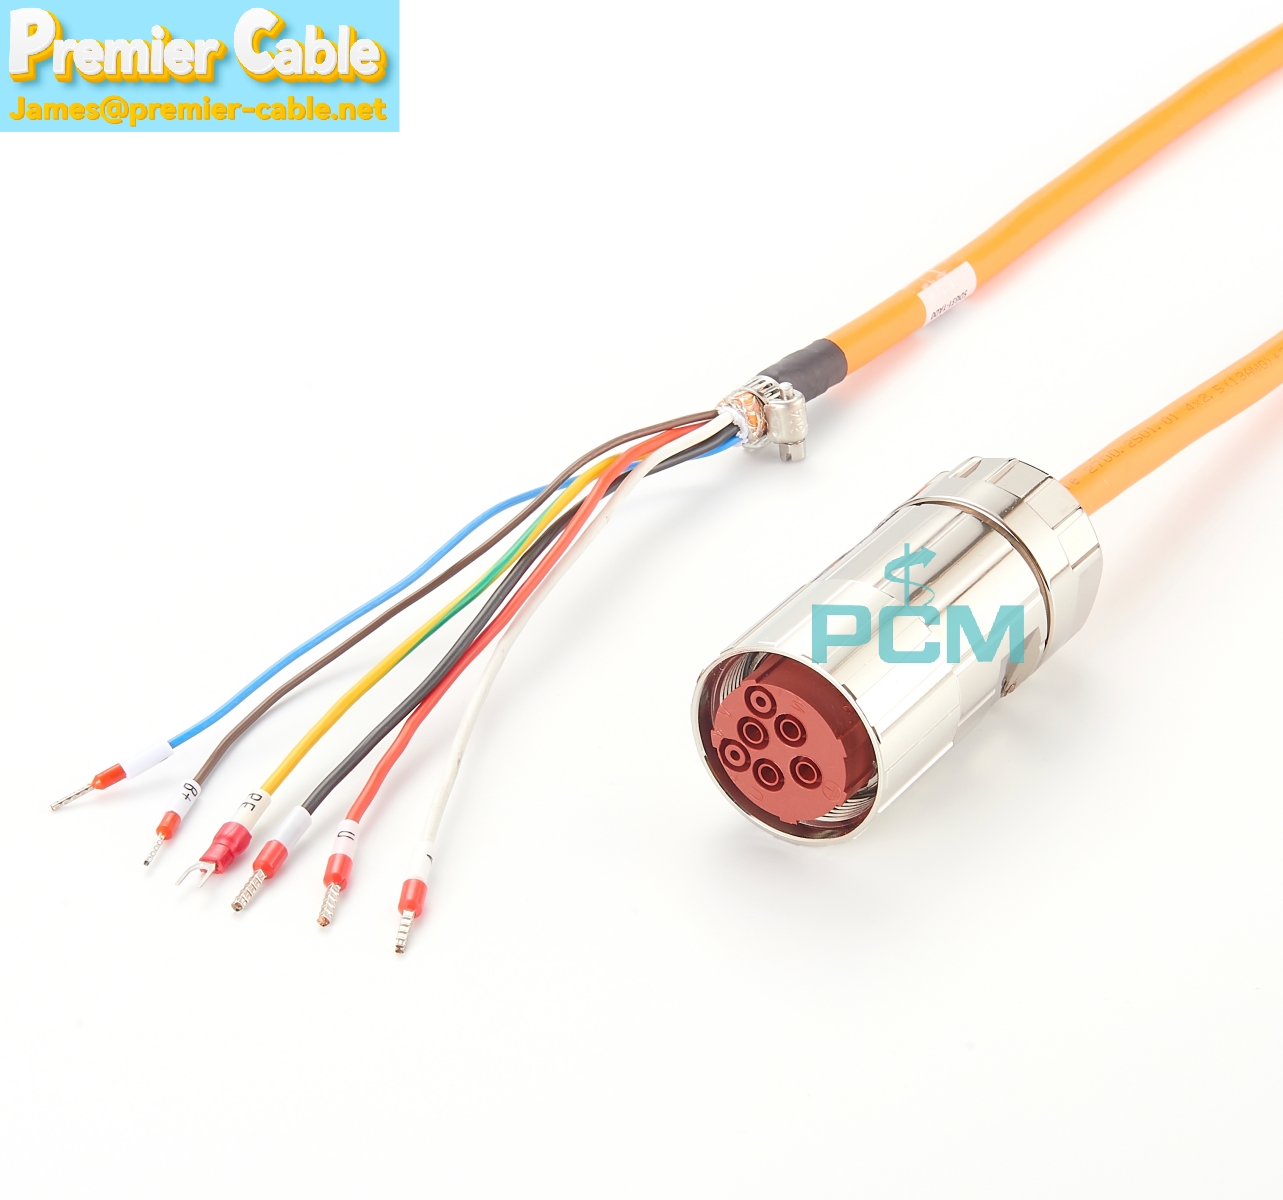 M40 power extension Servo motors and encoder cables 